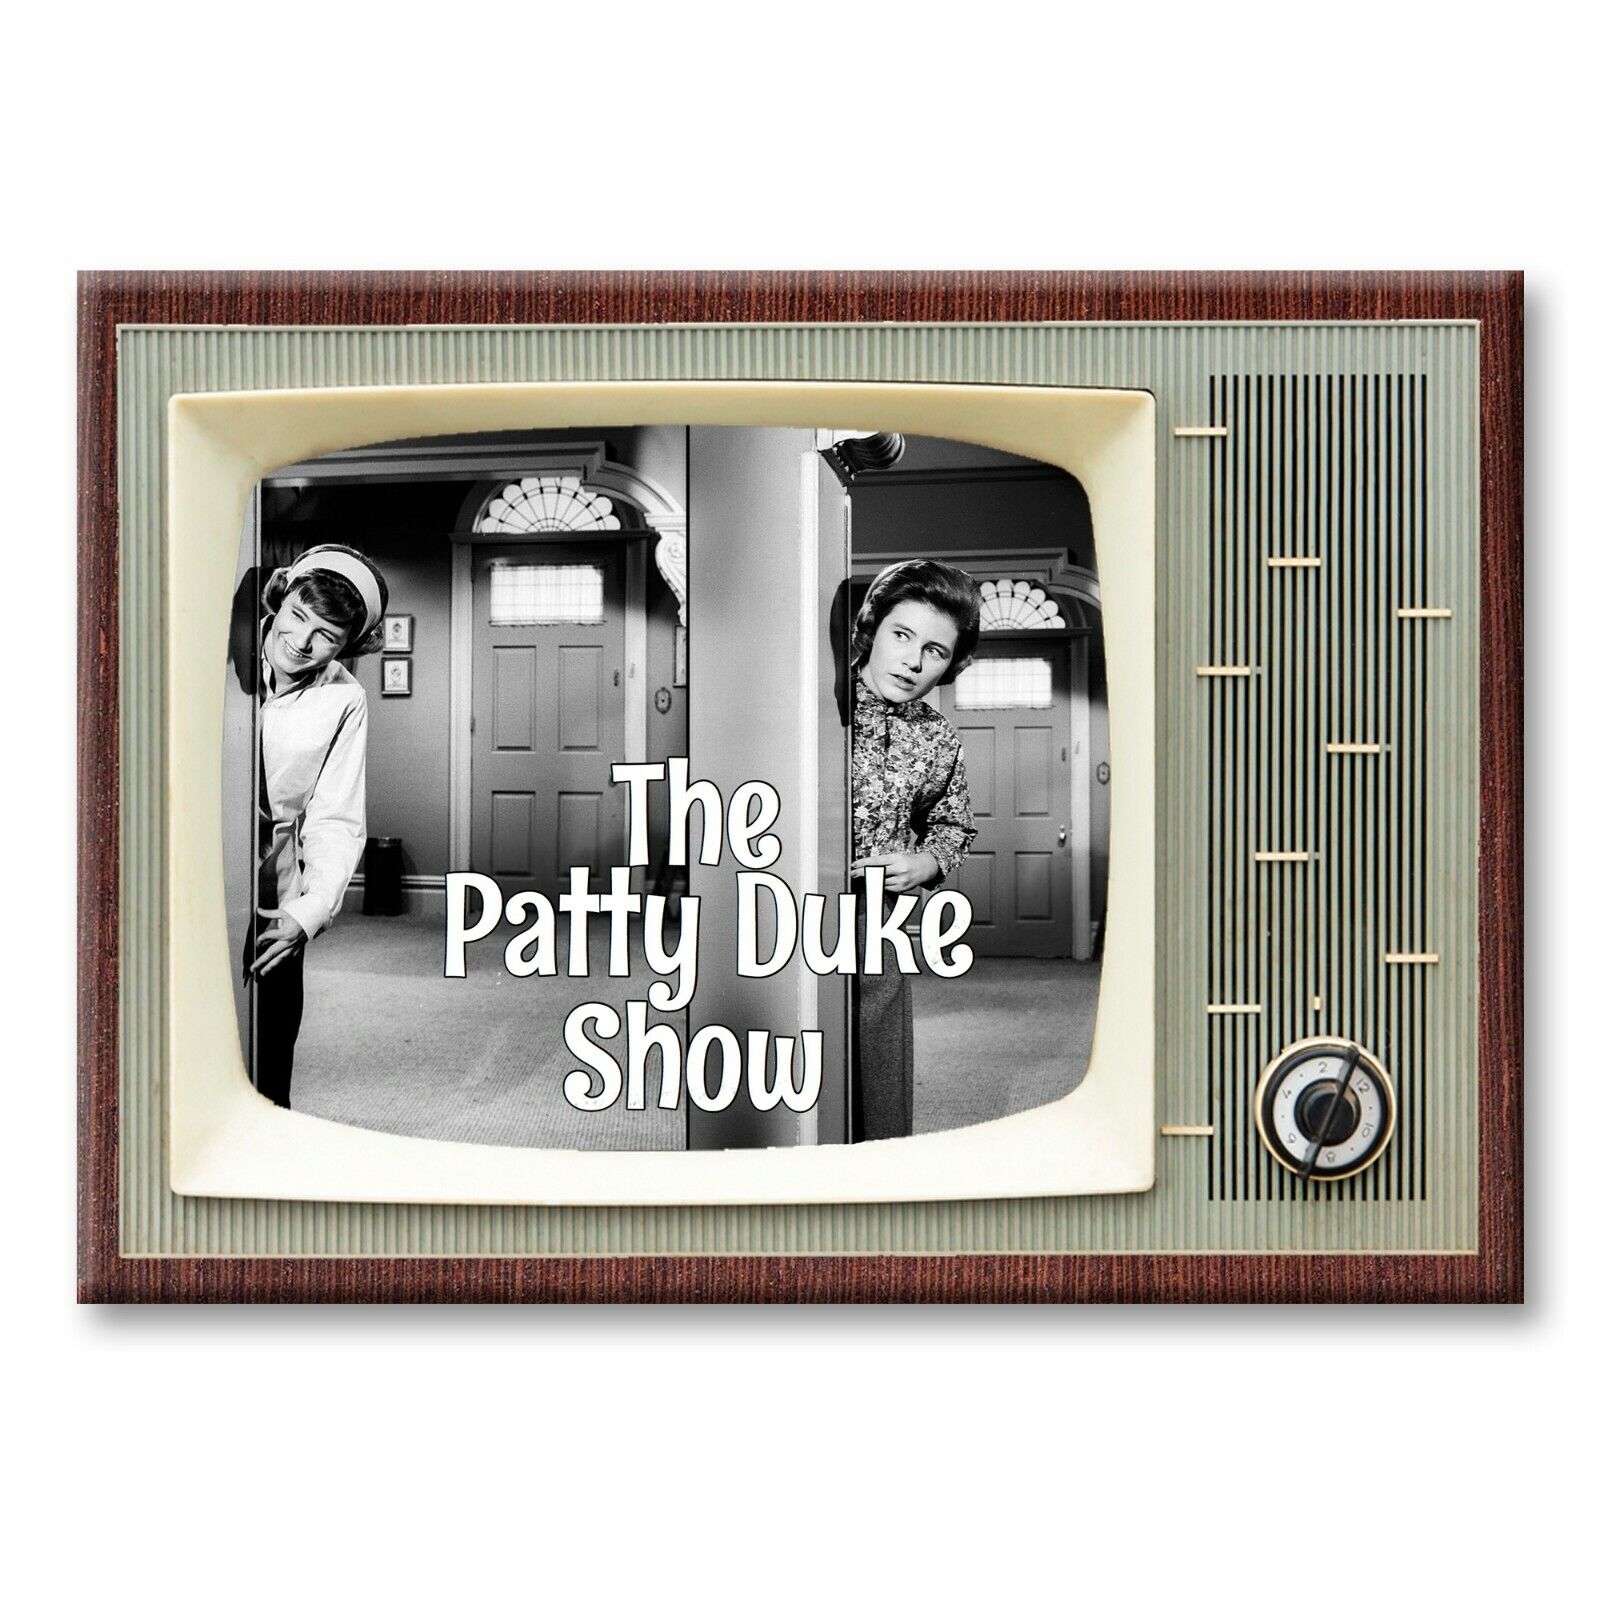 THE PATTY DUKE TV Show Classic TV 3.5 inches x 2.5 inches Steel FRIDGE MAGNET